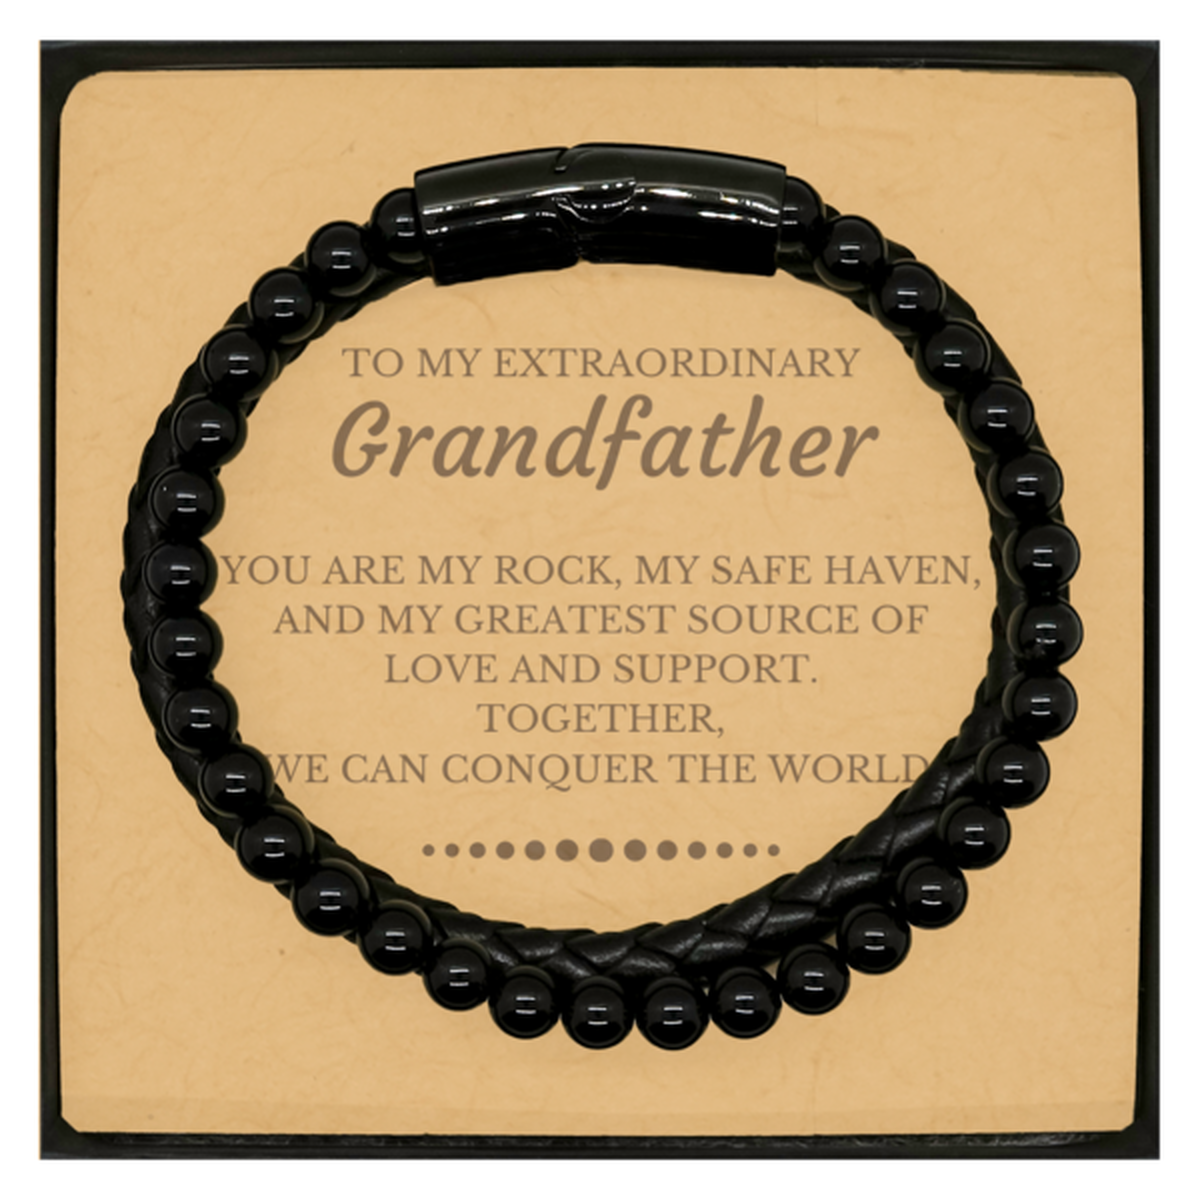 To My Extraordinary Grandfather Gifts, Together, we can conquer the world, Birthday Christmas Stone Leather Bracelets For Grandfather, Christmas Gifts For Grandfather